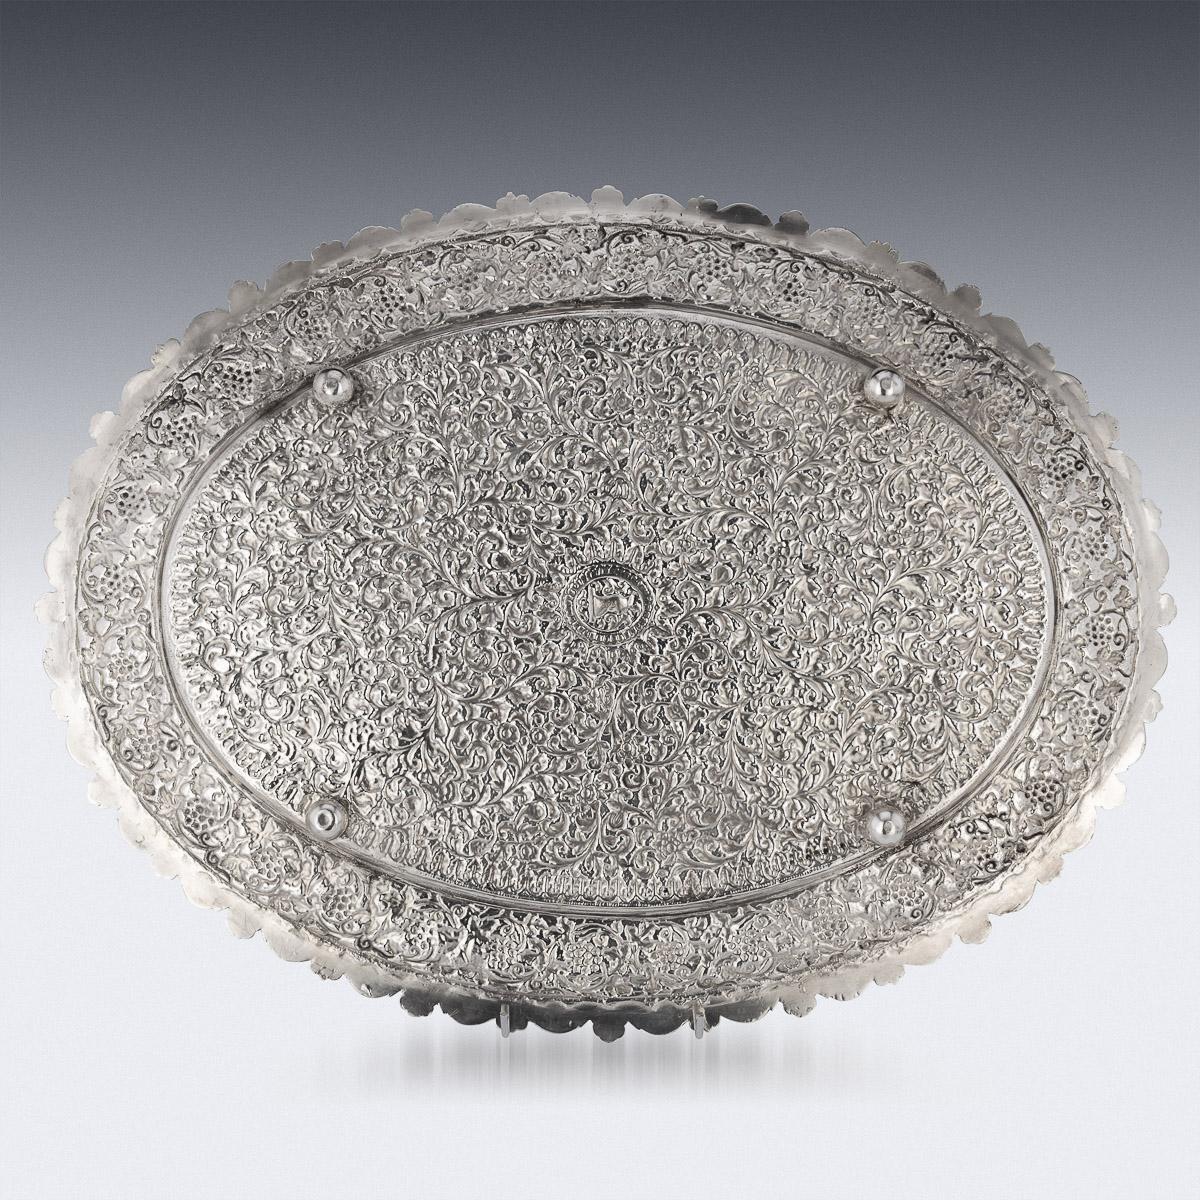 19th Century Indian Kutch (Cutch), Bhuj, (Gujarat region) hand-crafted solid silver tray, of shaped oval form, finely chased throughout with scrolling grapevines and floral patterns on a finely tooled matted ground, the tray resting on four ball